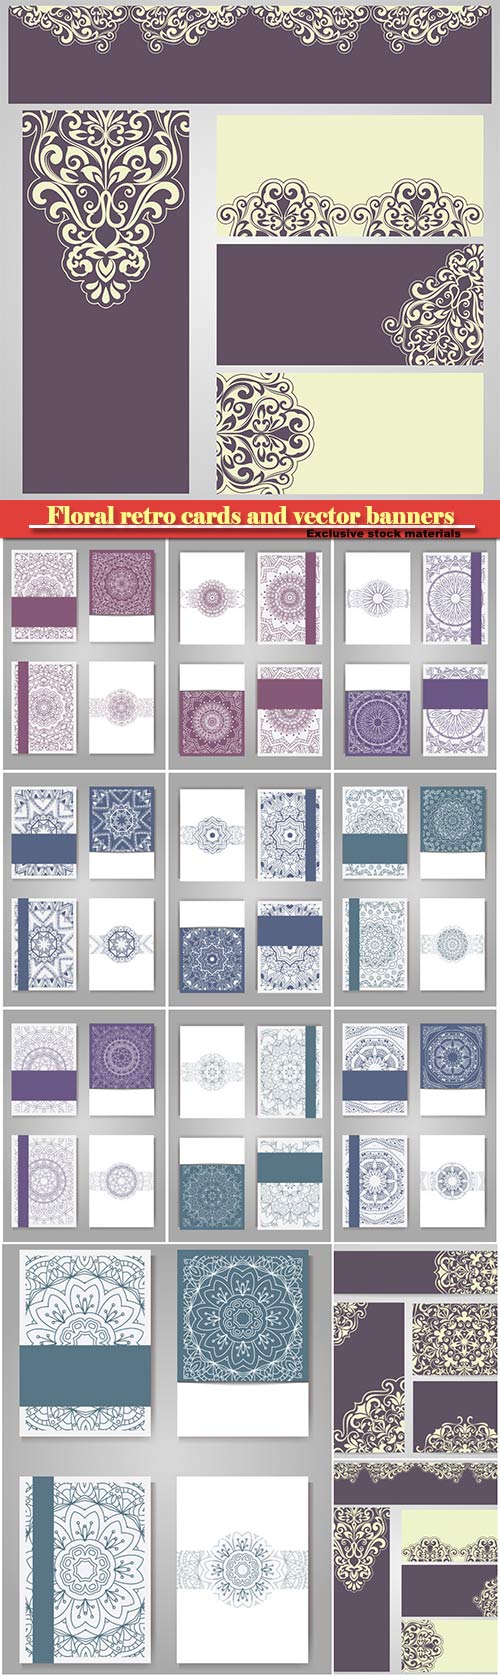 Floral retro cards and vector banners template with decorative ornament